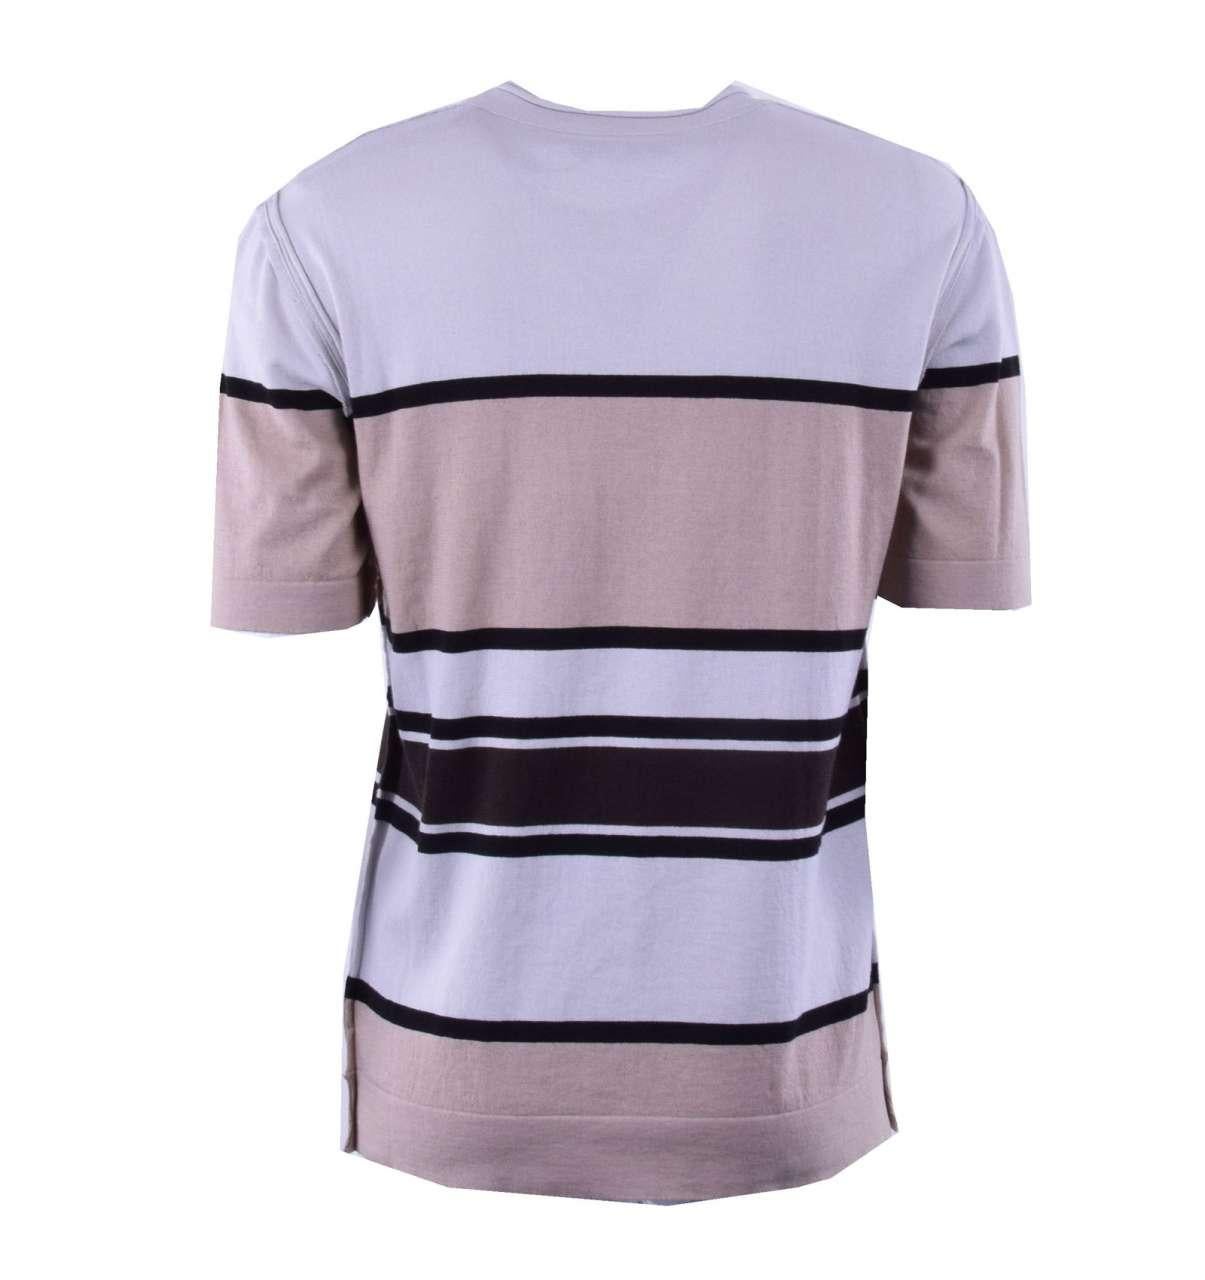 - Knitted T-Shirt made of cotton and cashmere with multicolored stripes and front pocket by DOLCE & GABBANA - New with Tag - Former RRP: EUR 395 - Material: 85% Cotton, 15% Cashmere - MADE IN ITALY - Slim F- Model: GF103K-F39AC-S8096 - Color: Brown